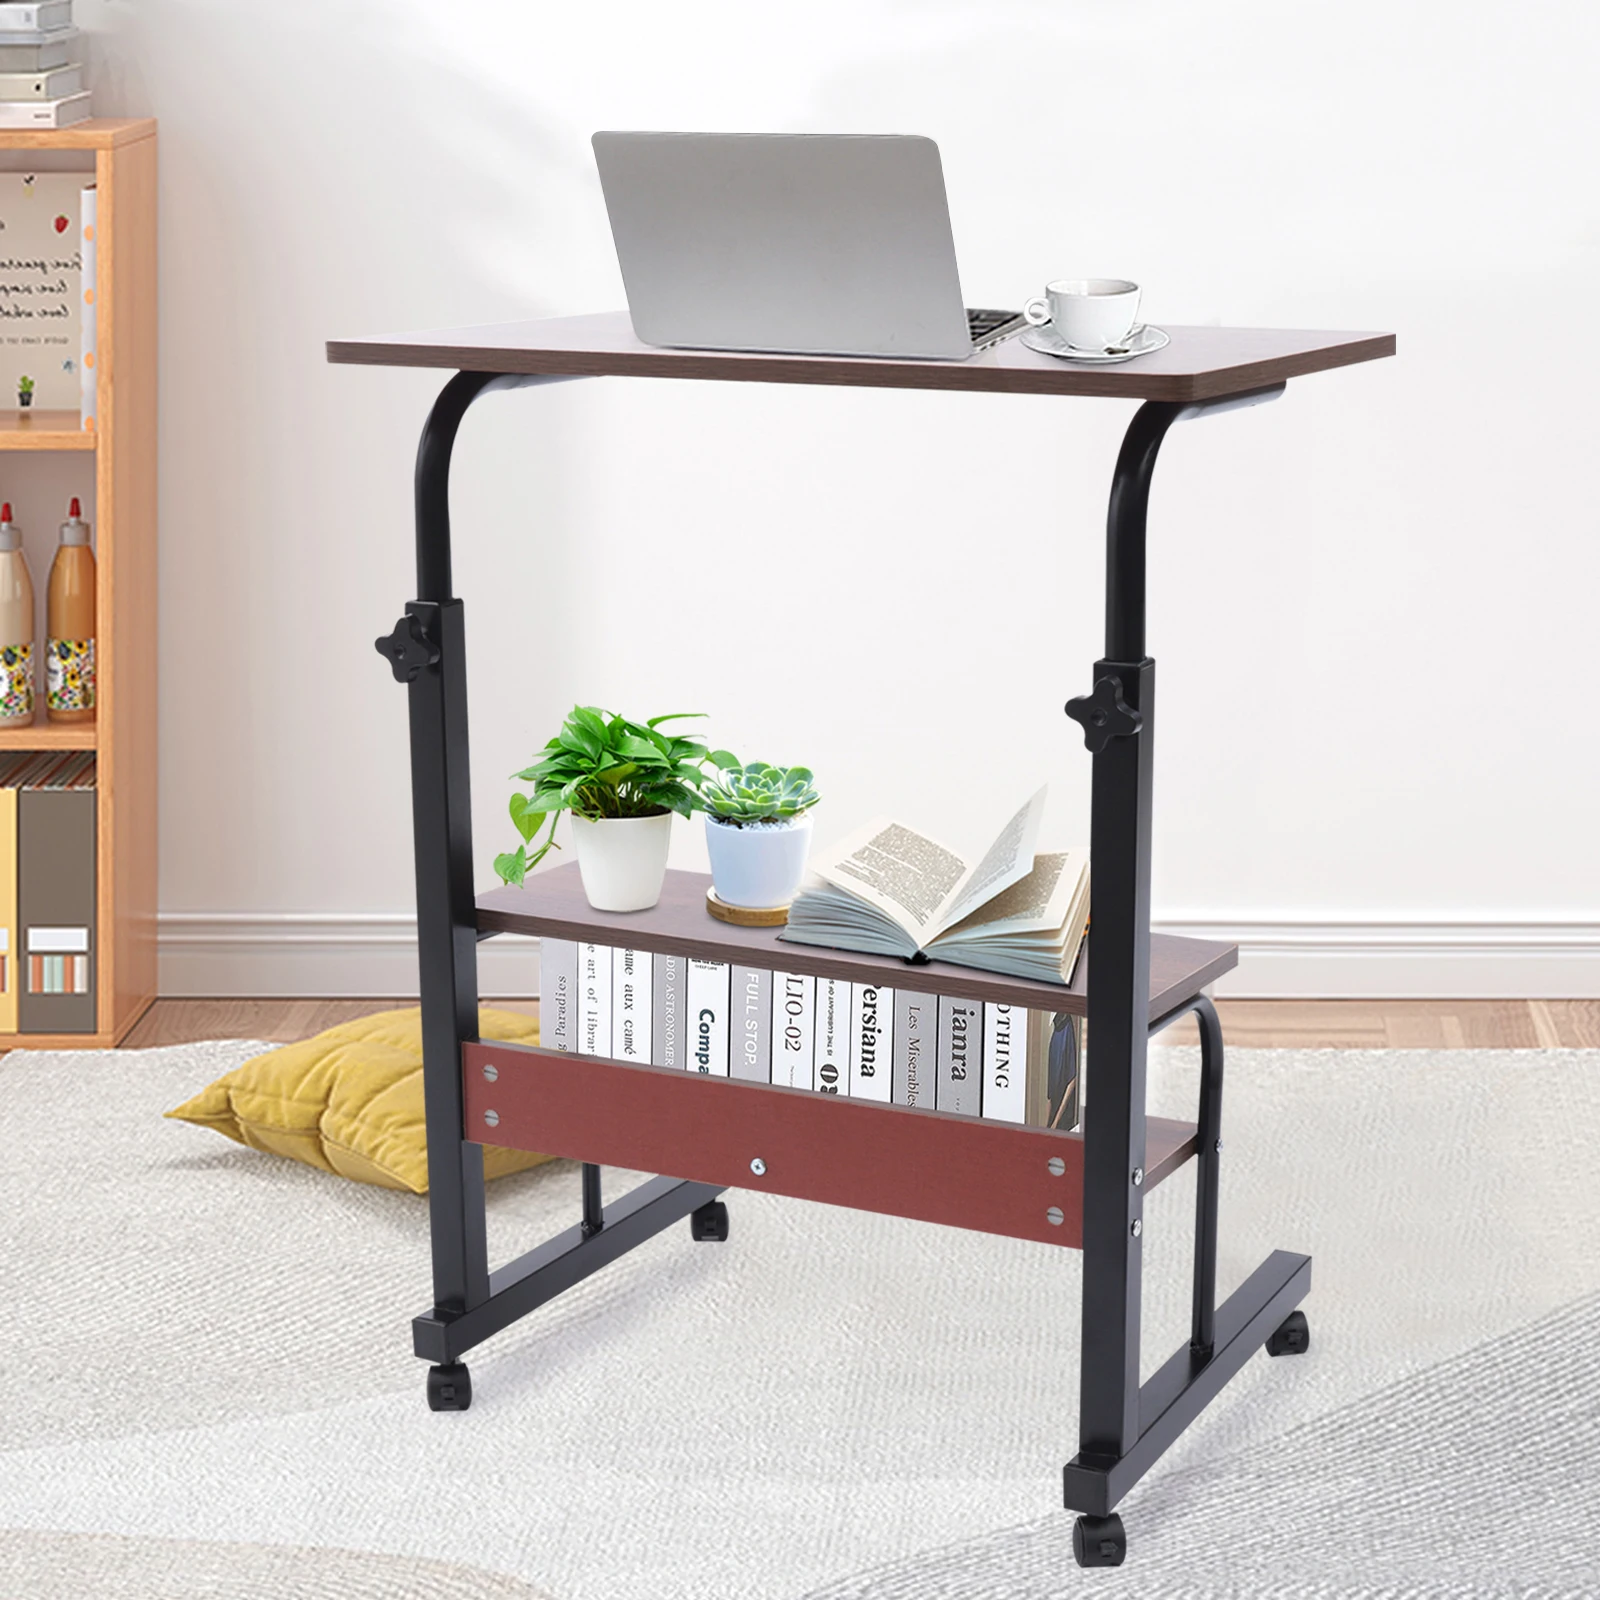 Rolling Side Table Adjustable Height Mobile Laptop Side Table With Double Storage Rack rolling laptop desk stand overbed food tray rack computer bedside table height angle adjustable